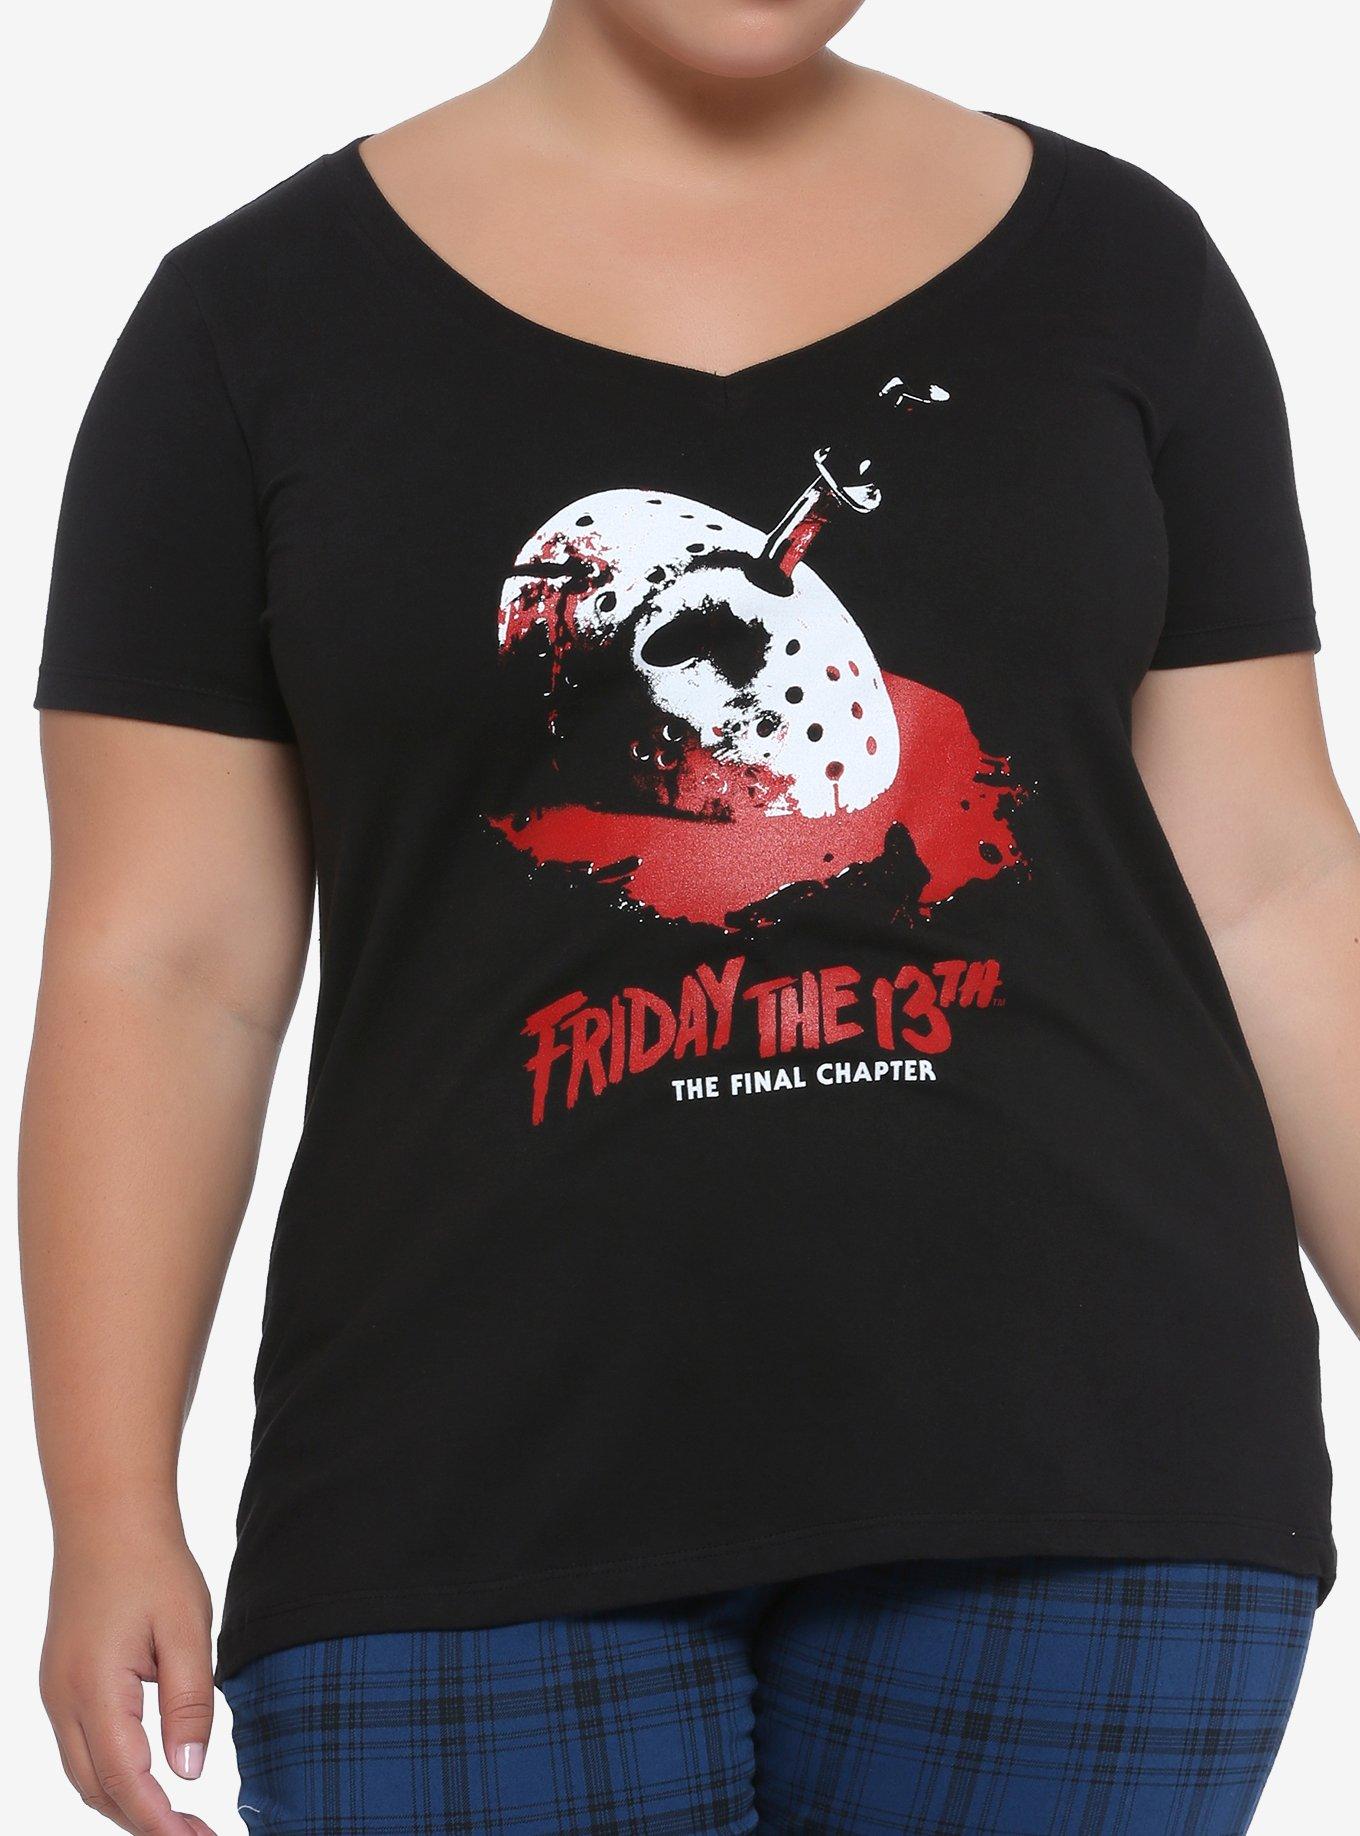 Friday The 13th: The Final Chapter Girls T-Shirt Plus Size, BLACK, hi-res